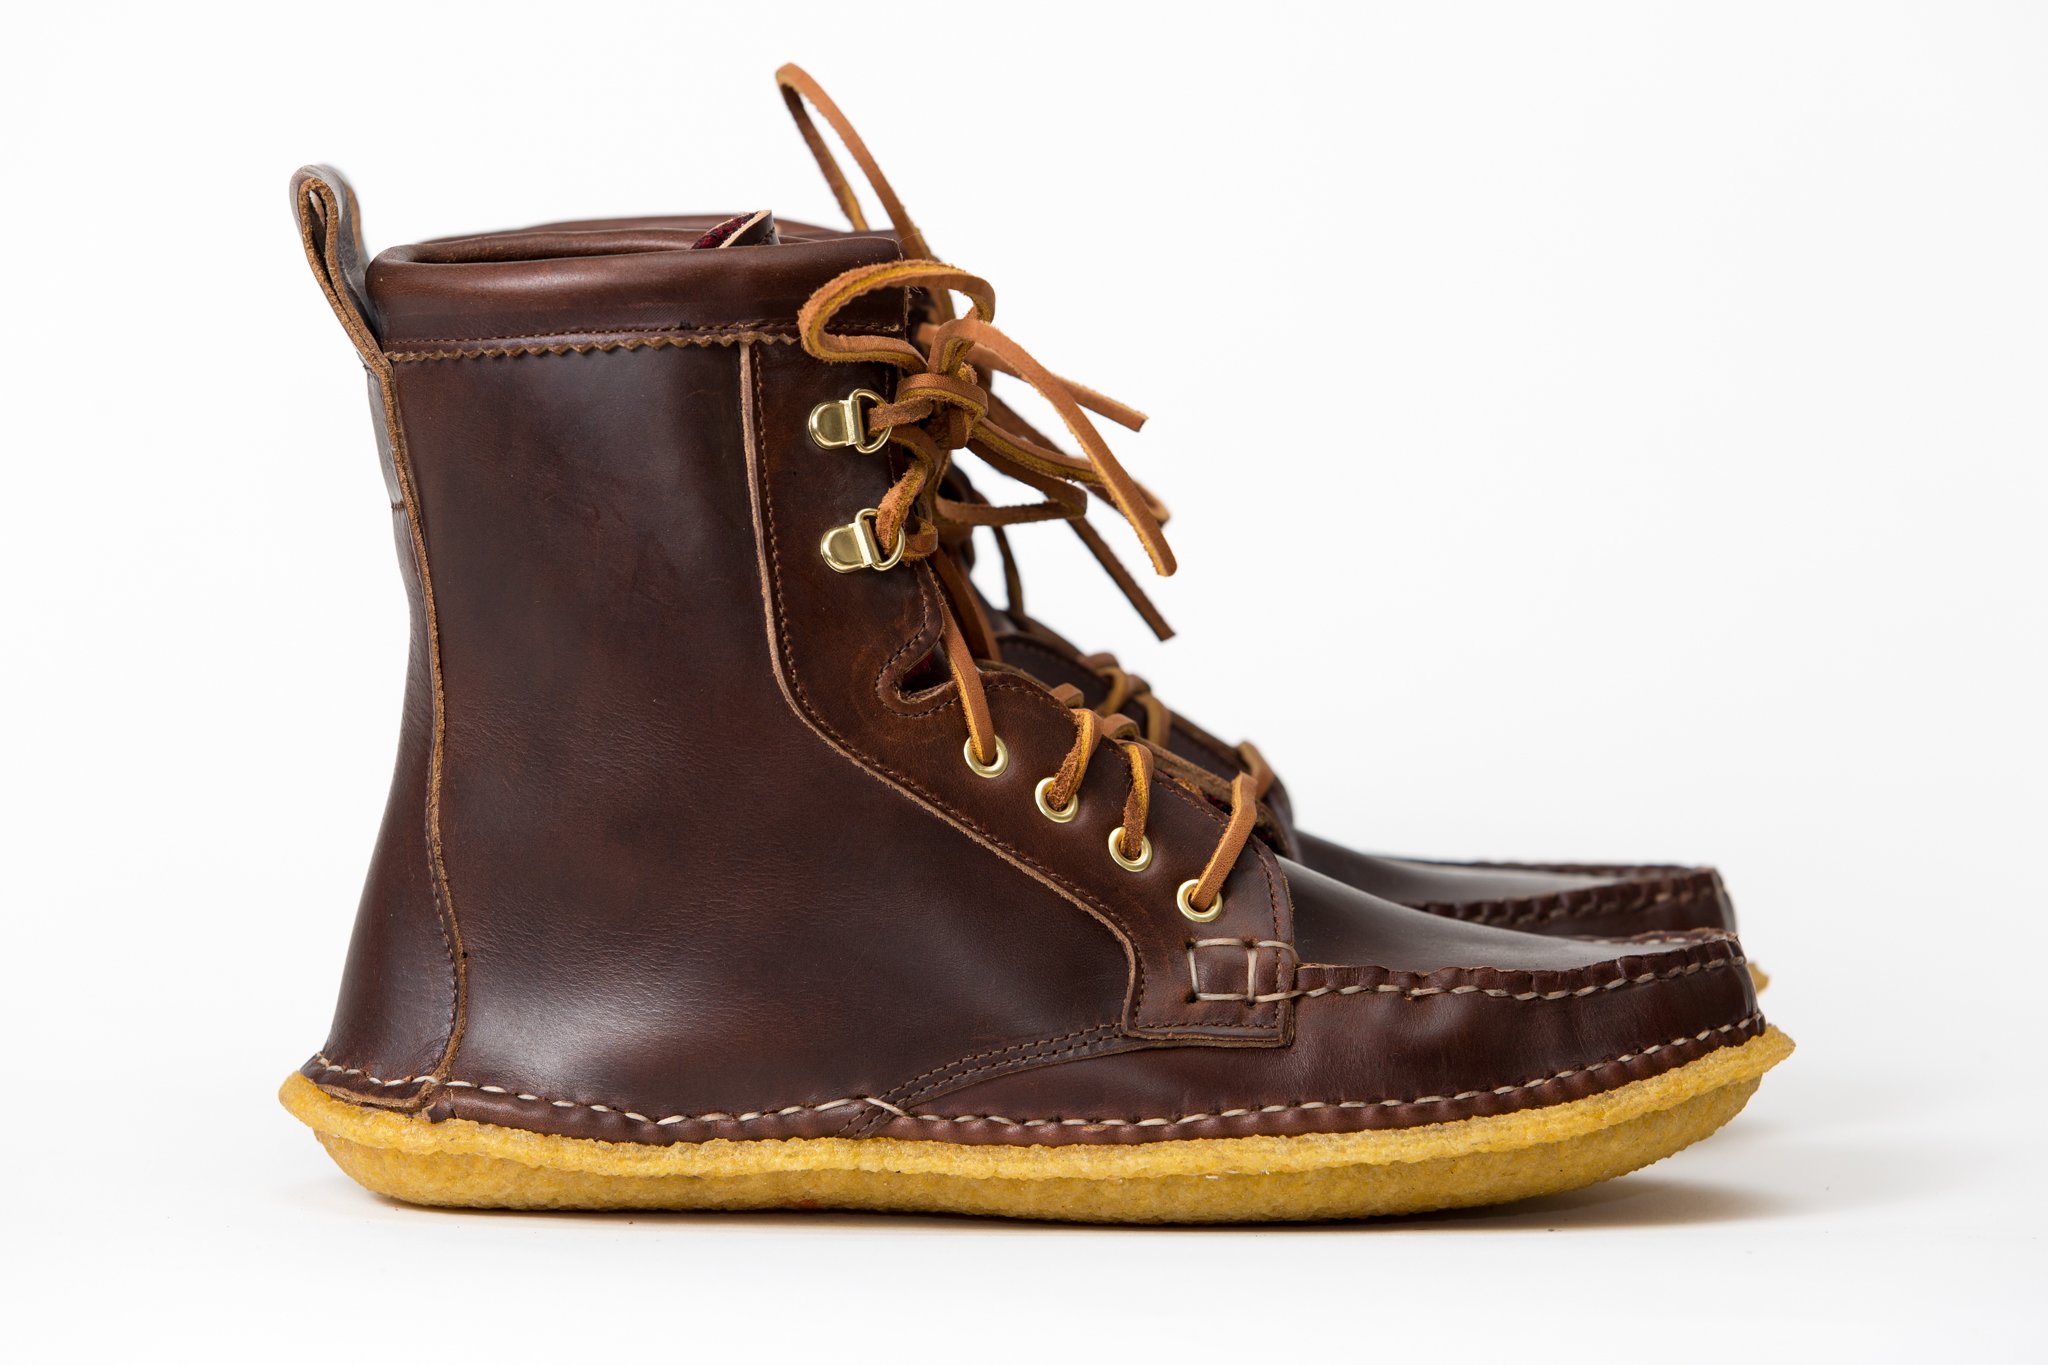 Maine Mountain Moccasin Brown CXL Woolrich Boot